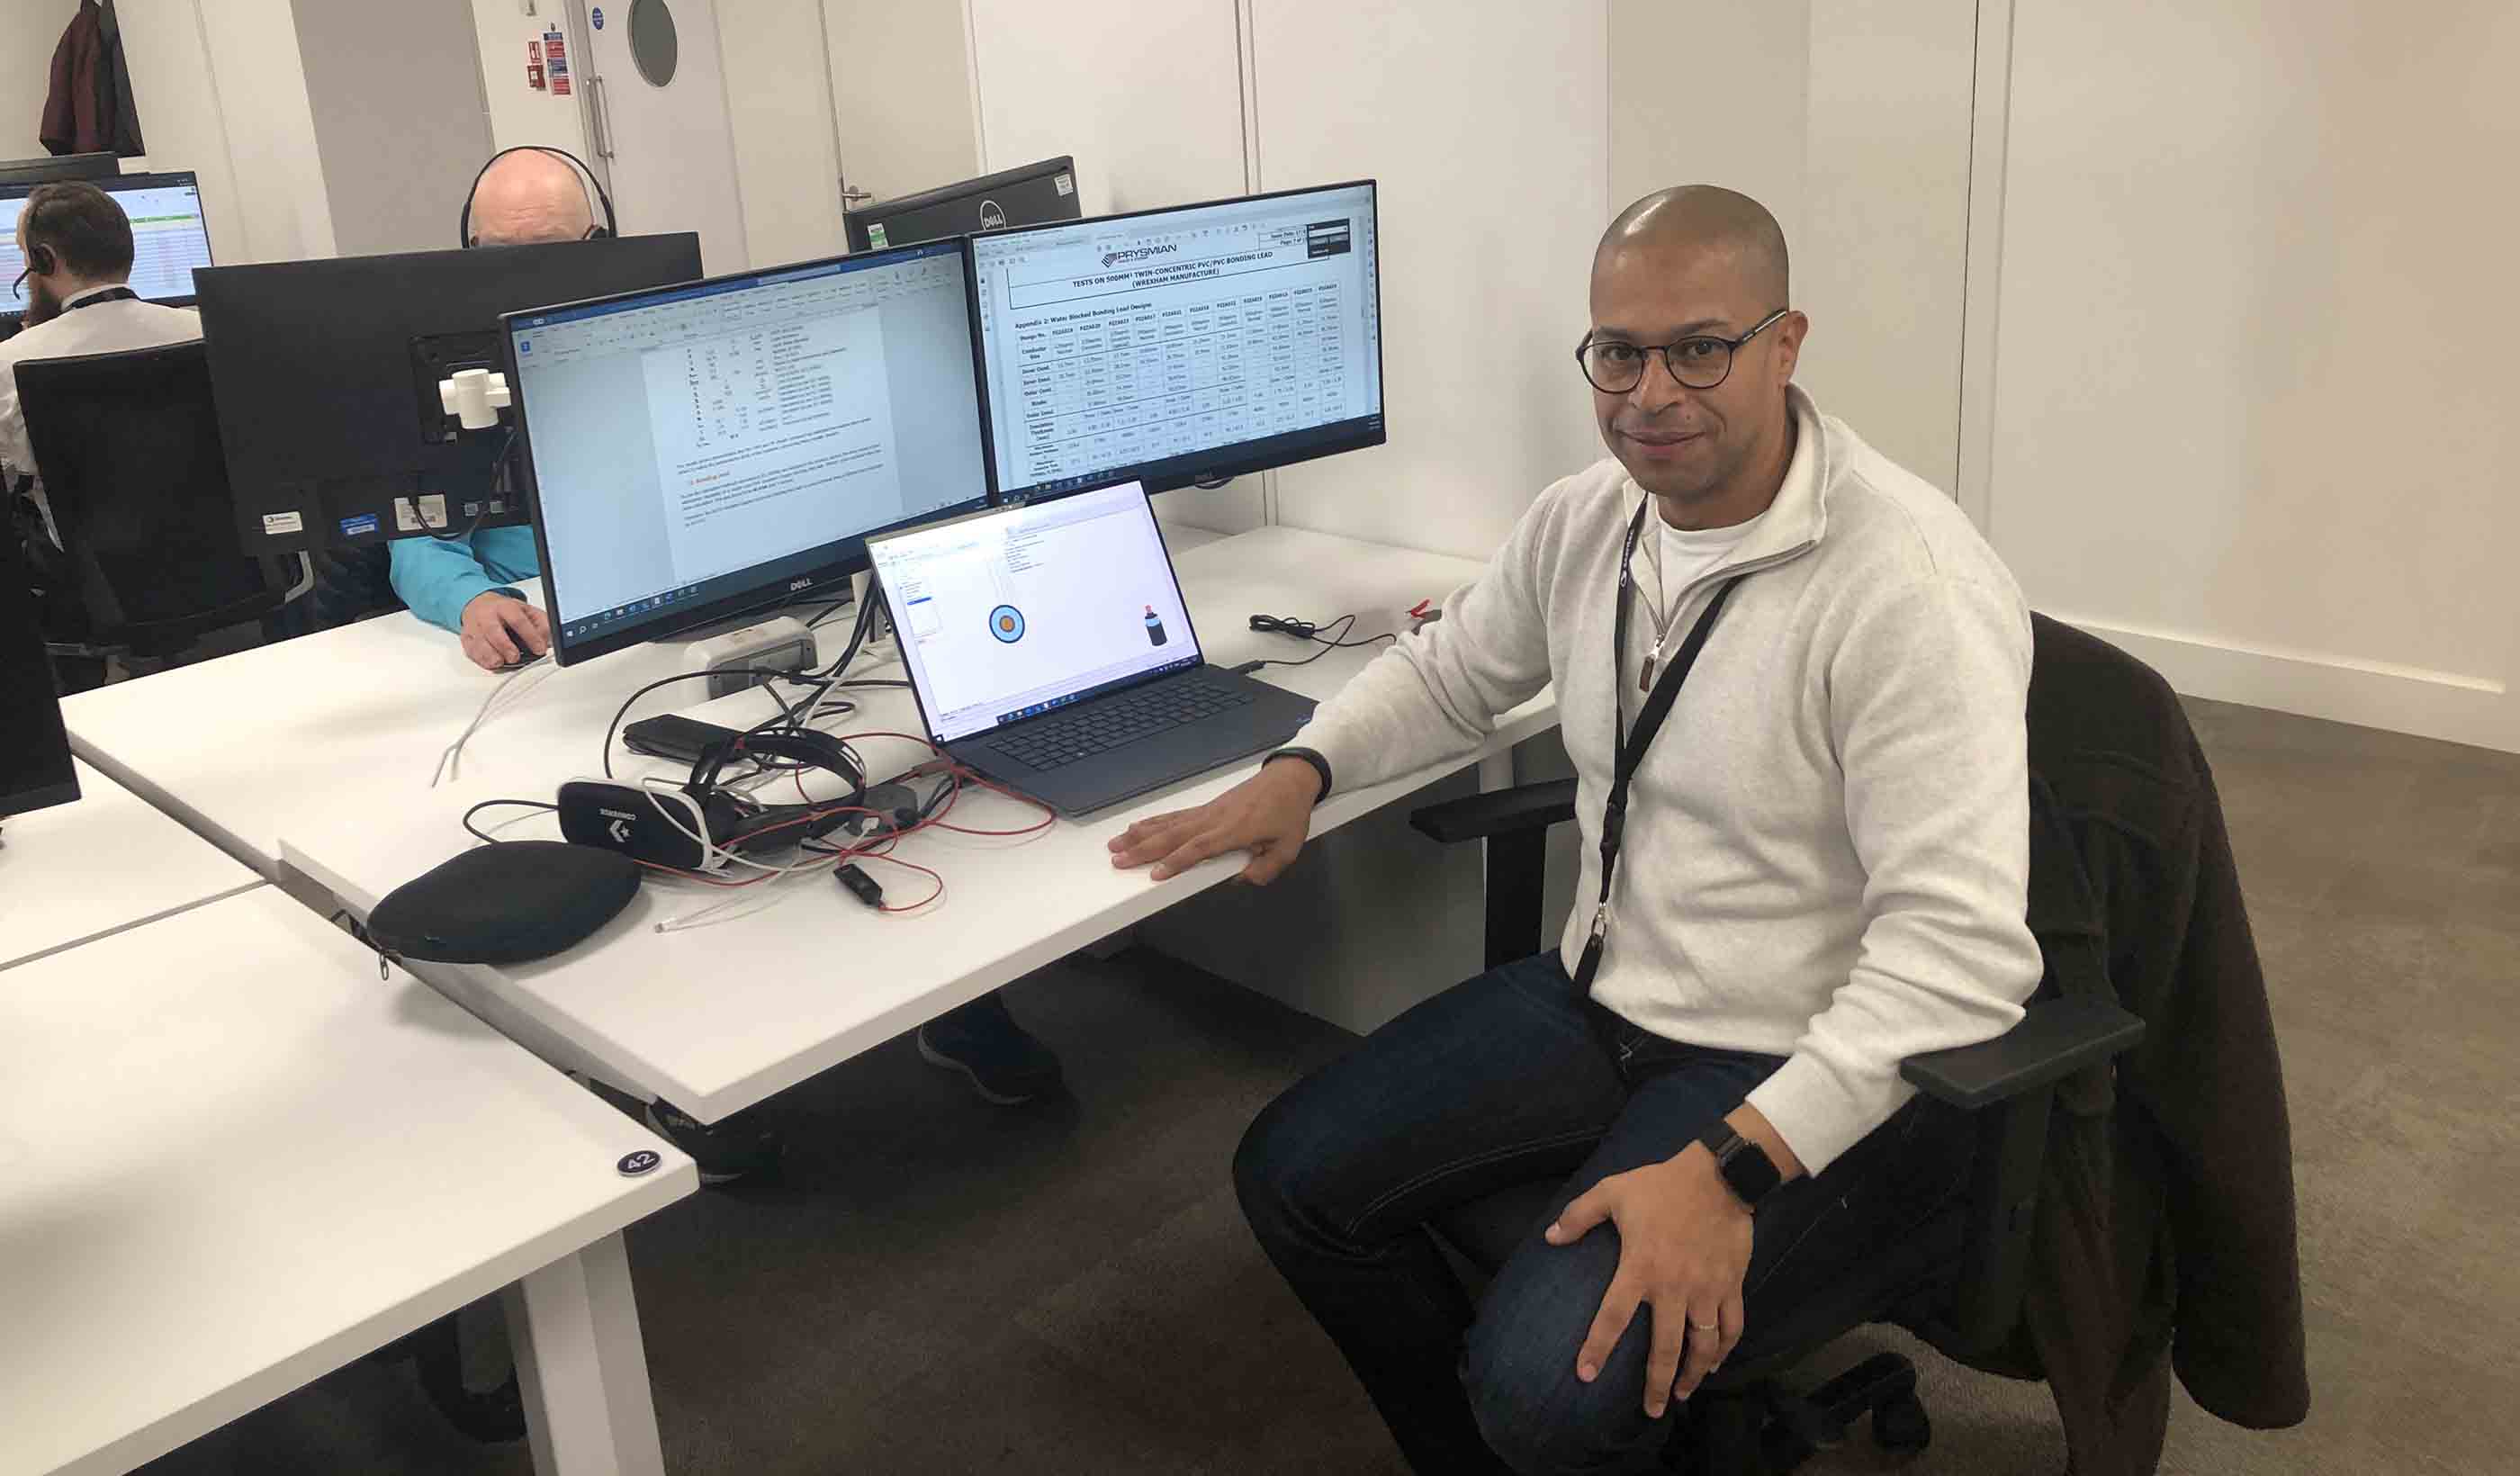 My Stantec Story: Othmane El Mountassir on being an electrical engineer at Stantec